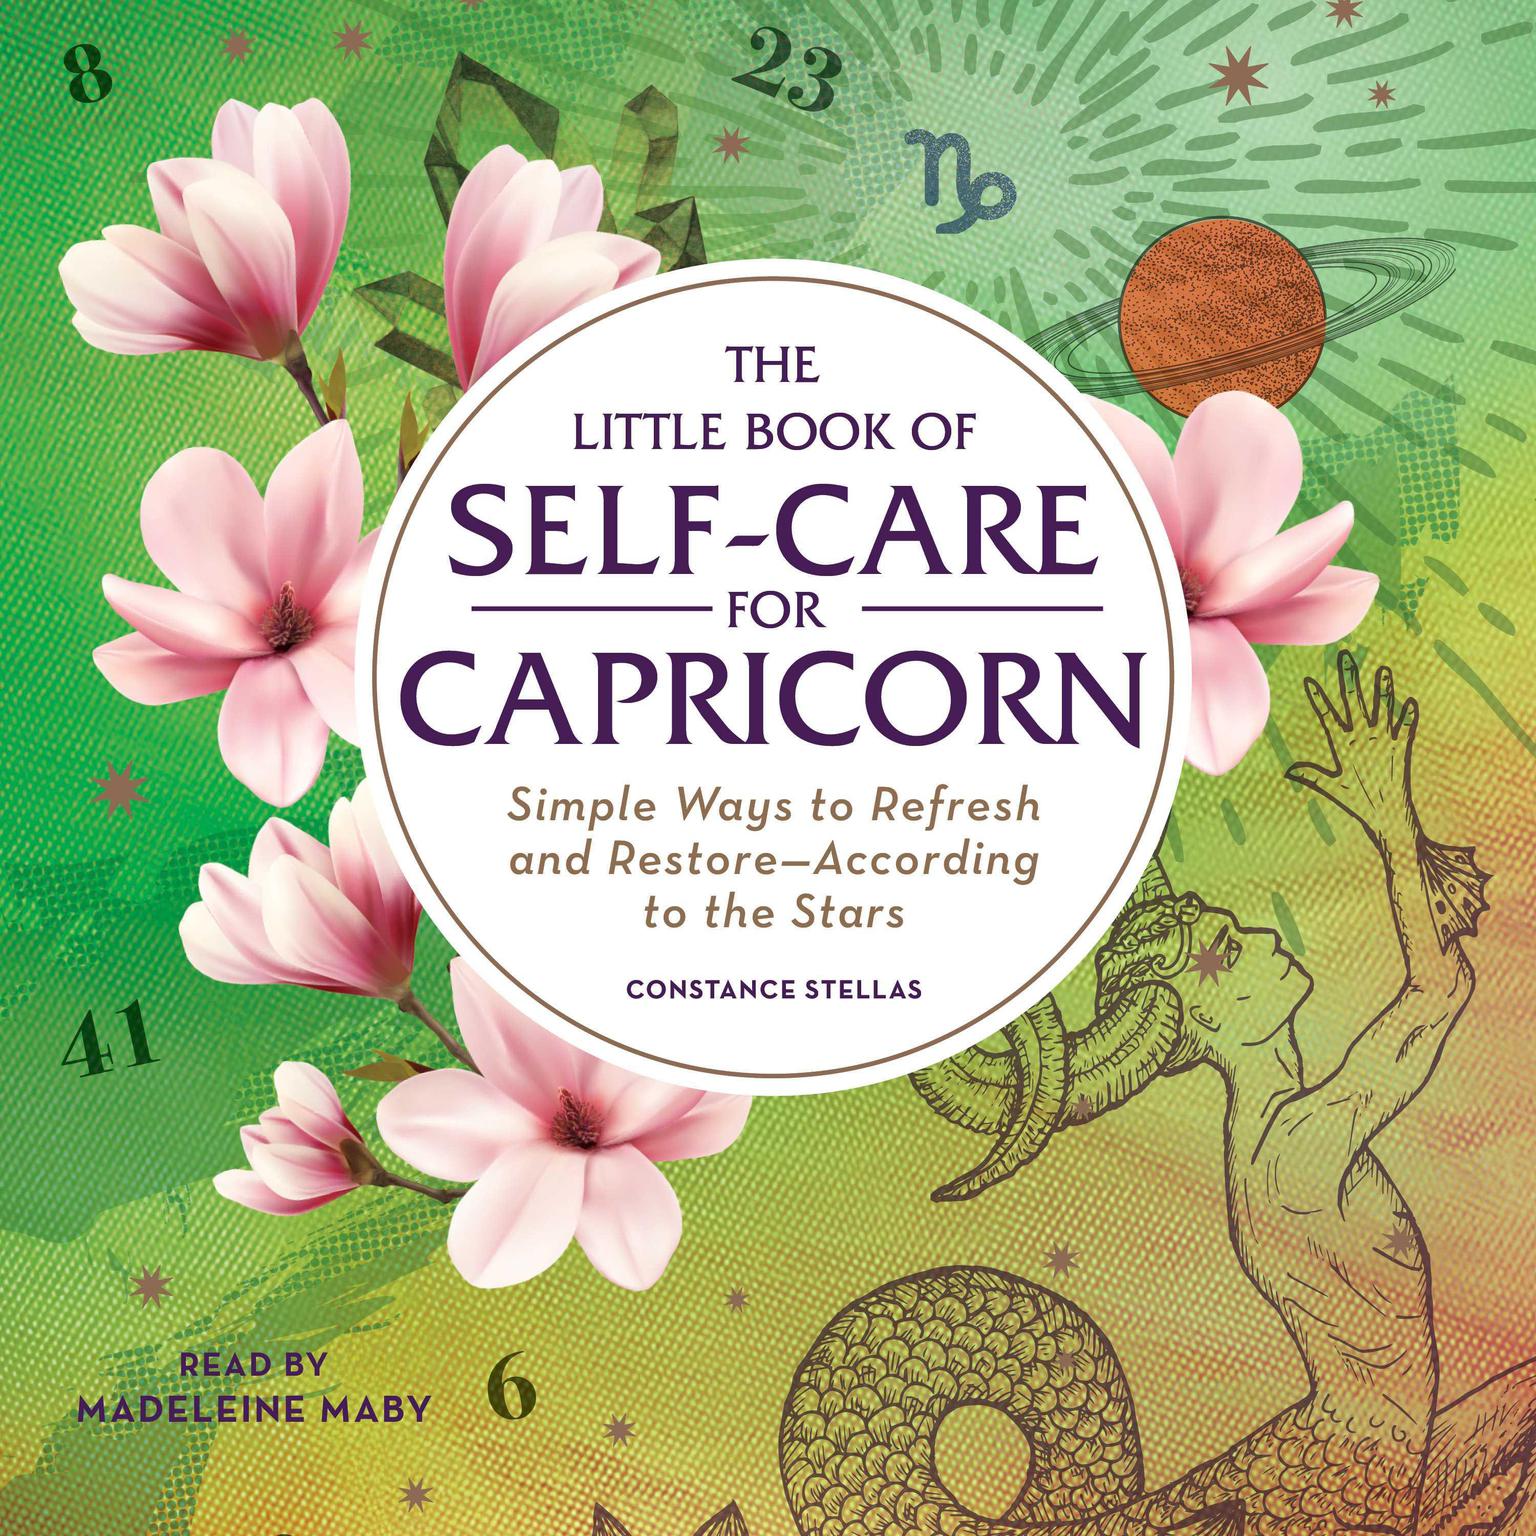 The Little Book of Self-Care for Capricorn: Simple Ways to Refresh and Restore—According to the Stars Audiobook, by Constance Stellas